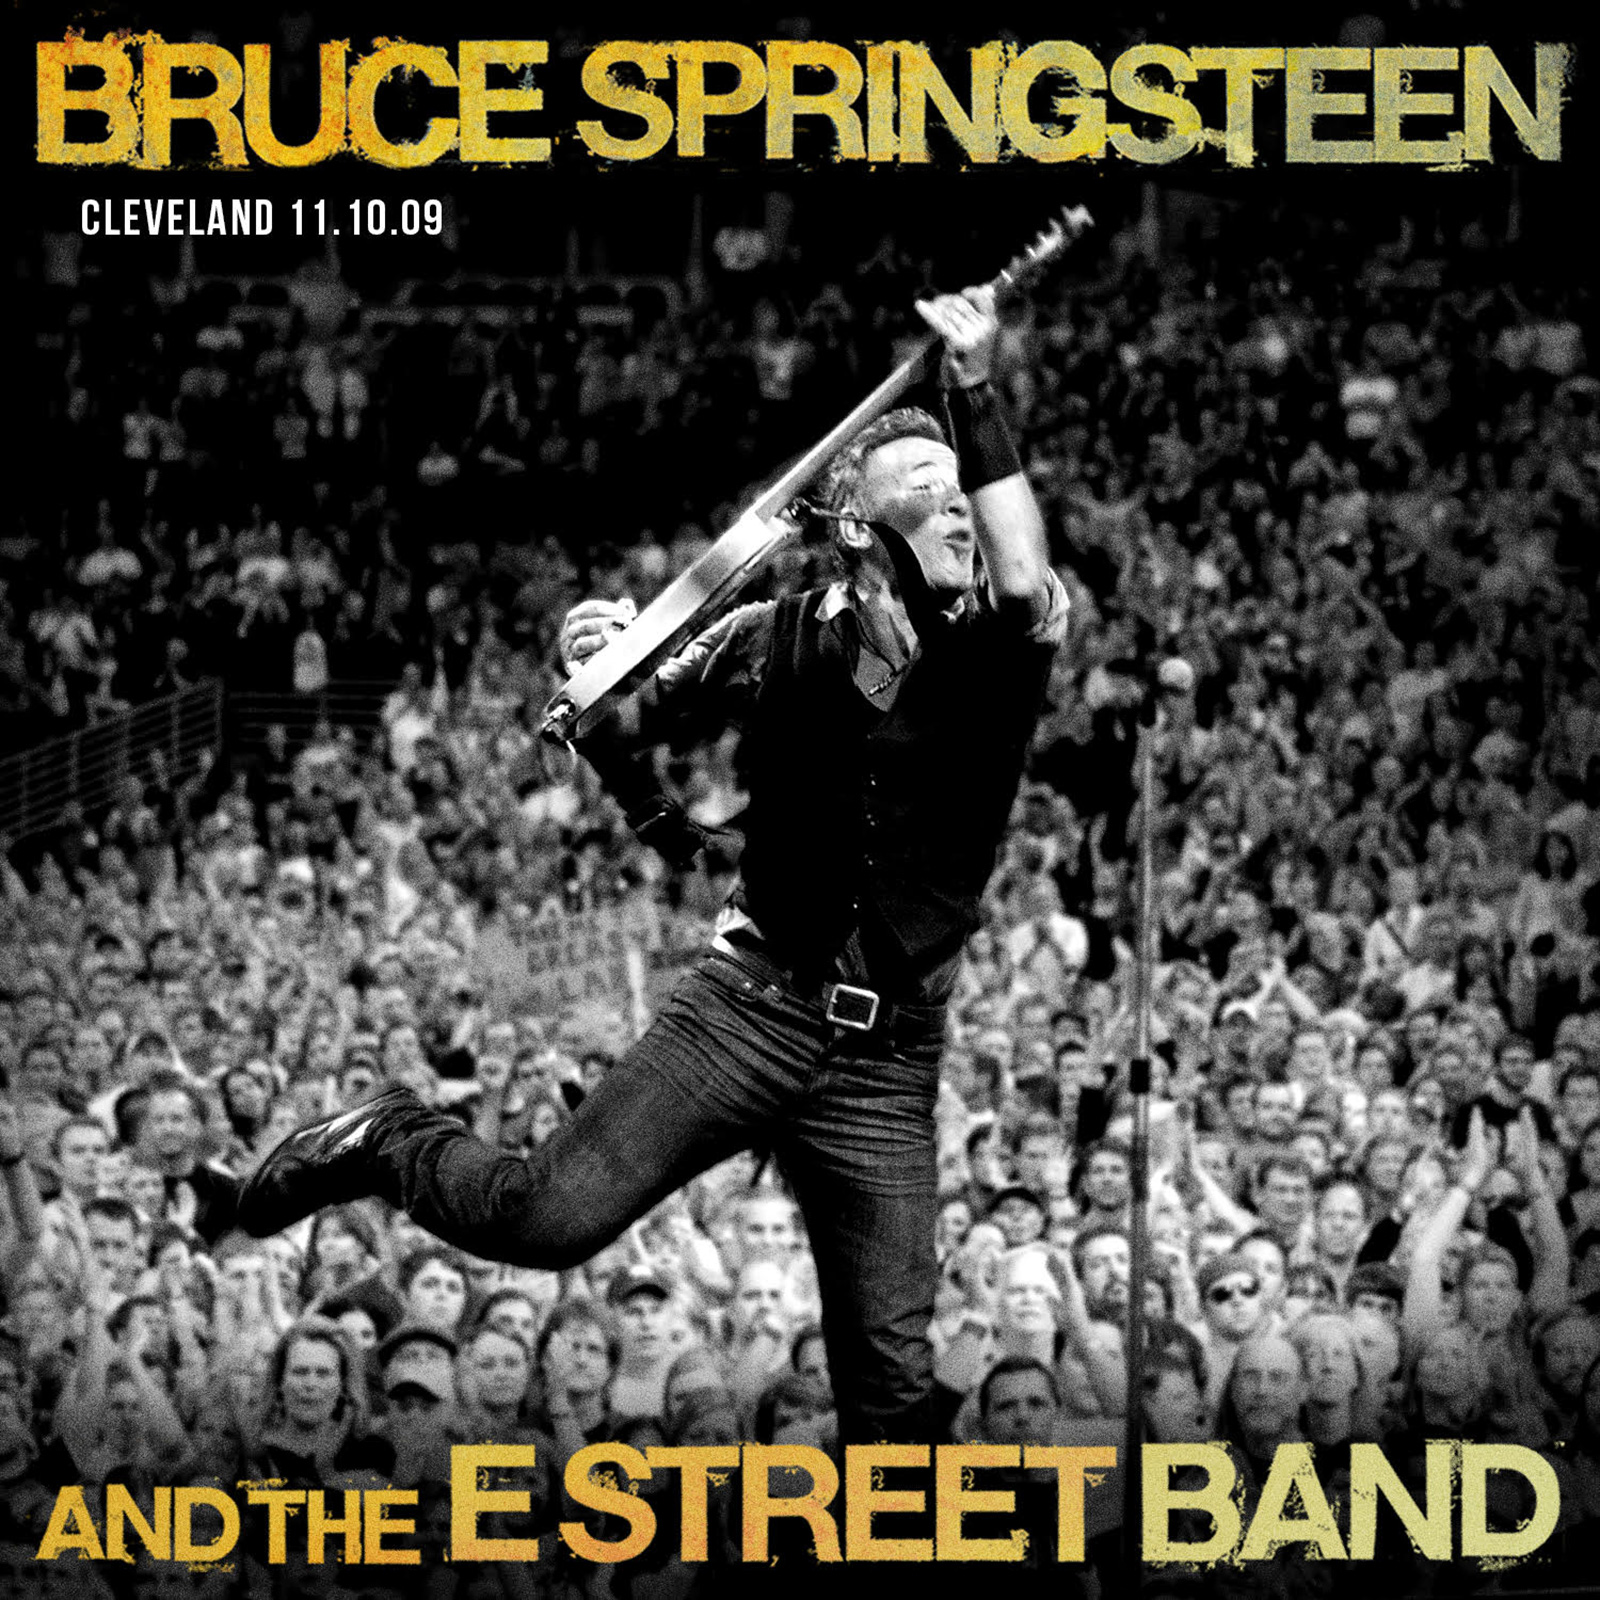 Bruce Springsteen & The E Street Band - 2009-11-10 Quicken Loans Arena, Cleveland, OH (2022) [FLAC 24bit/48kHz]